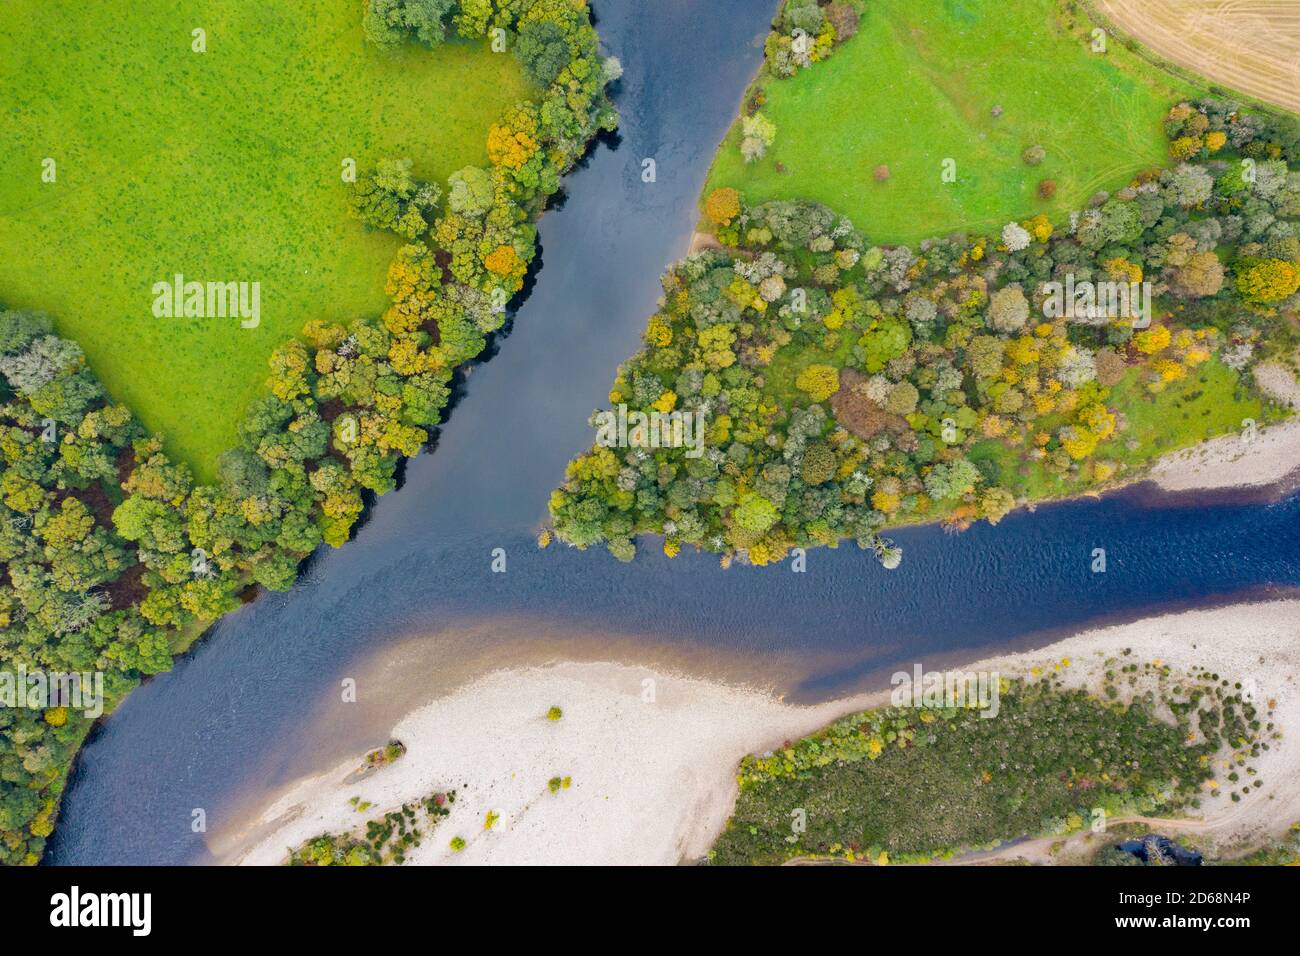 Autumn view of confluence of River Tay and River Tummel at Ballinluig. River Tay (top) and River Tummel are two of ScotlandÕs foremost salmon rivers. Stock Photo